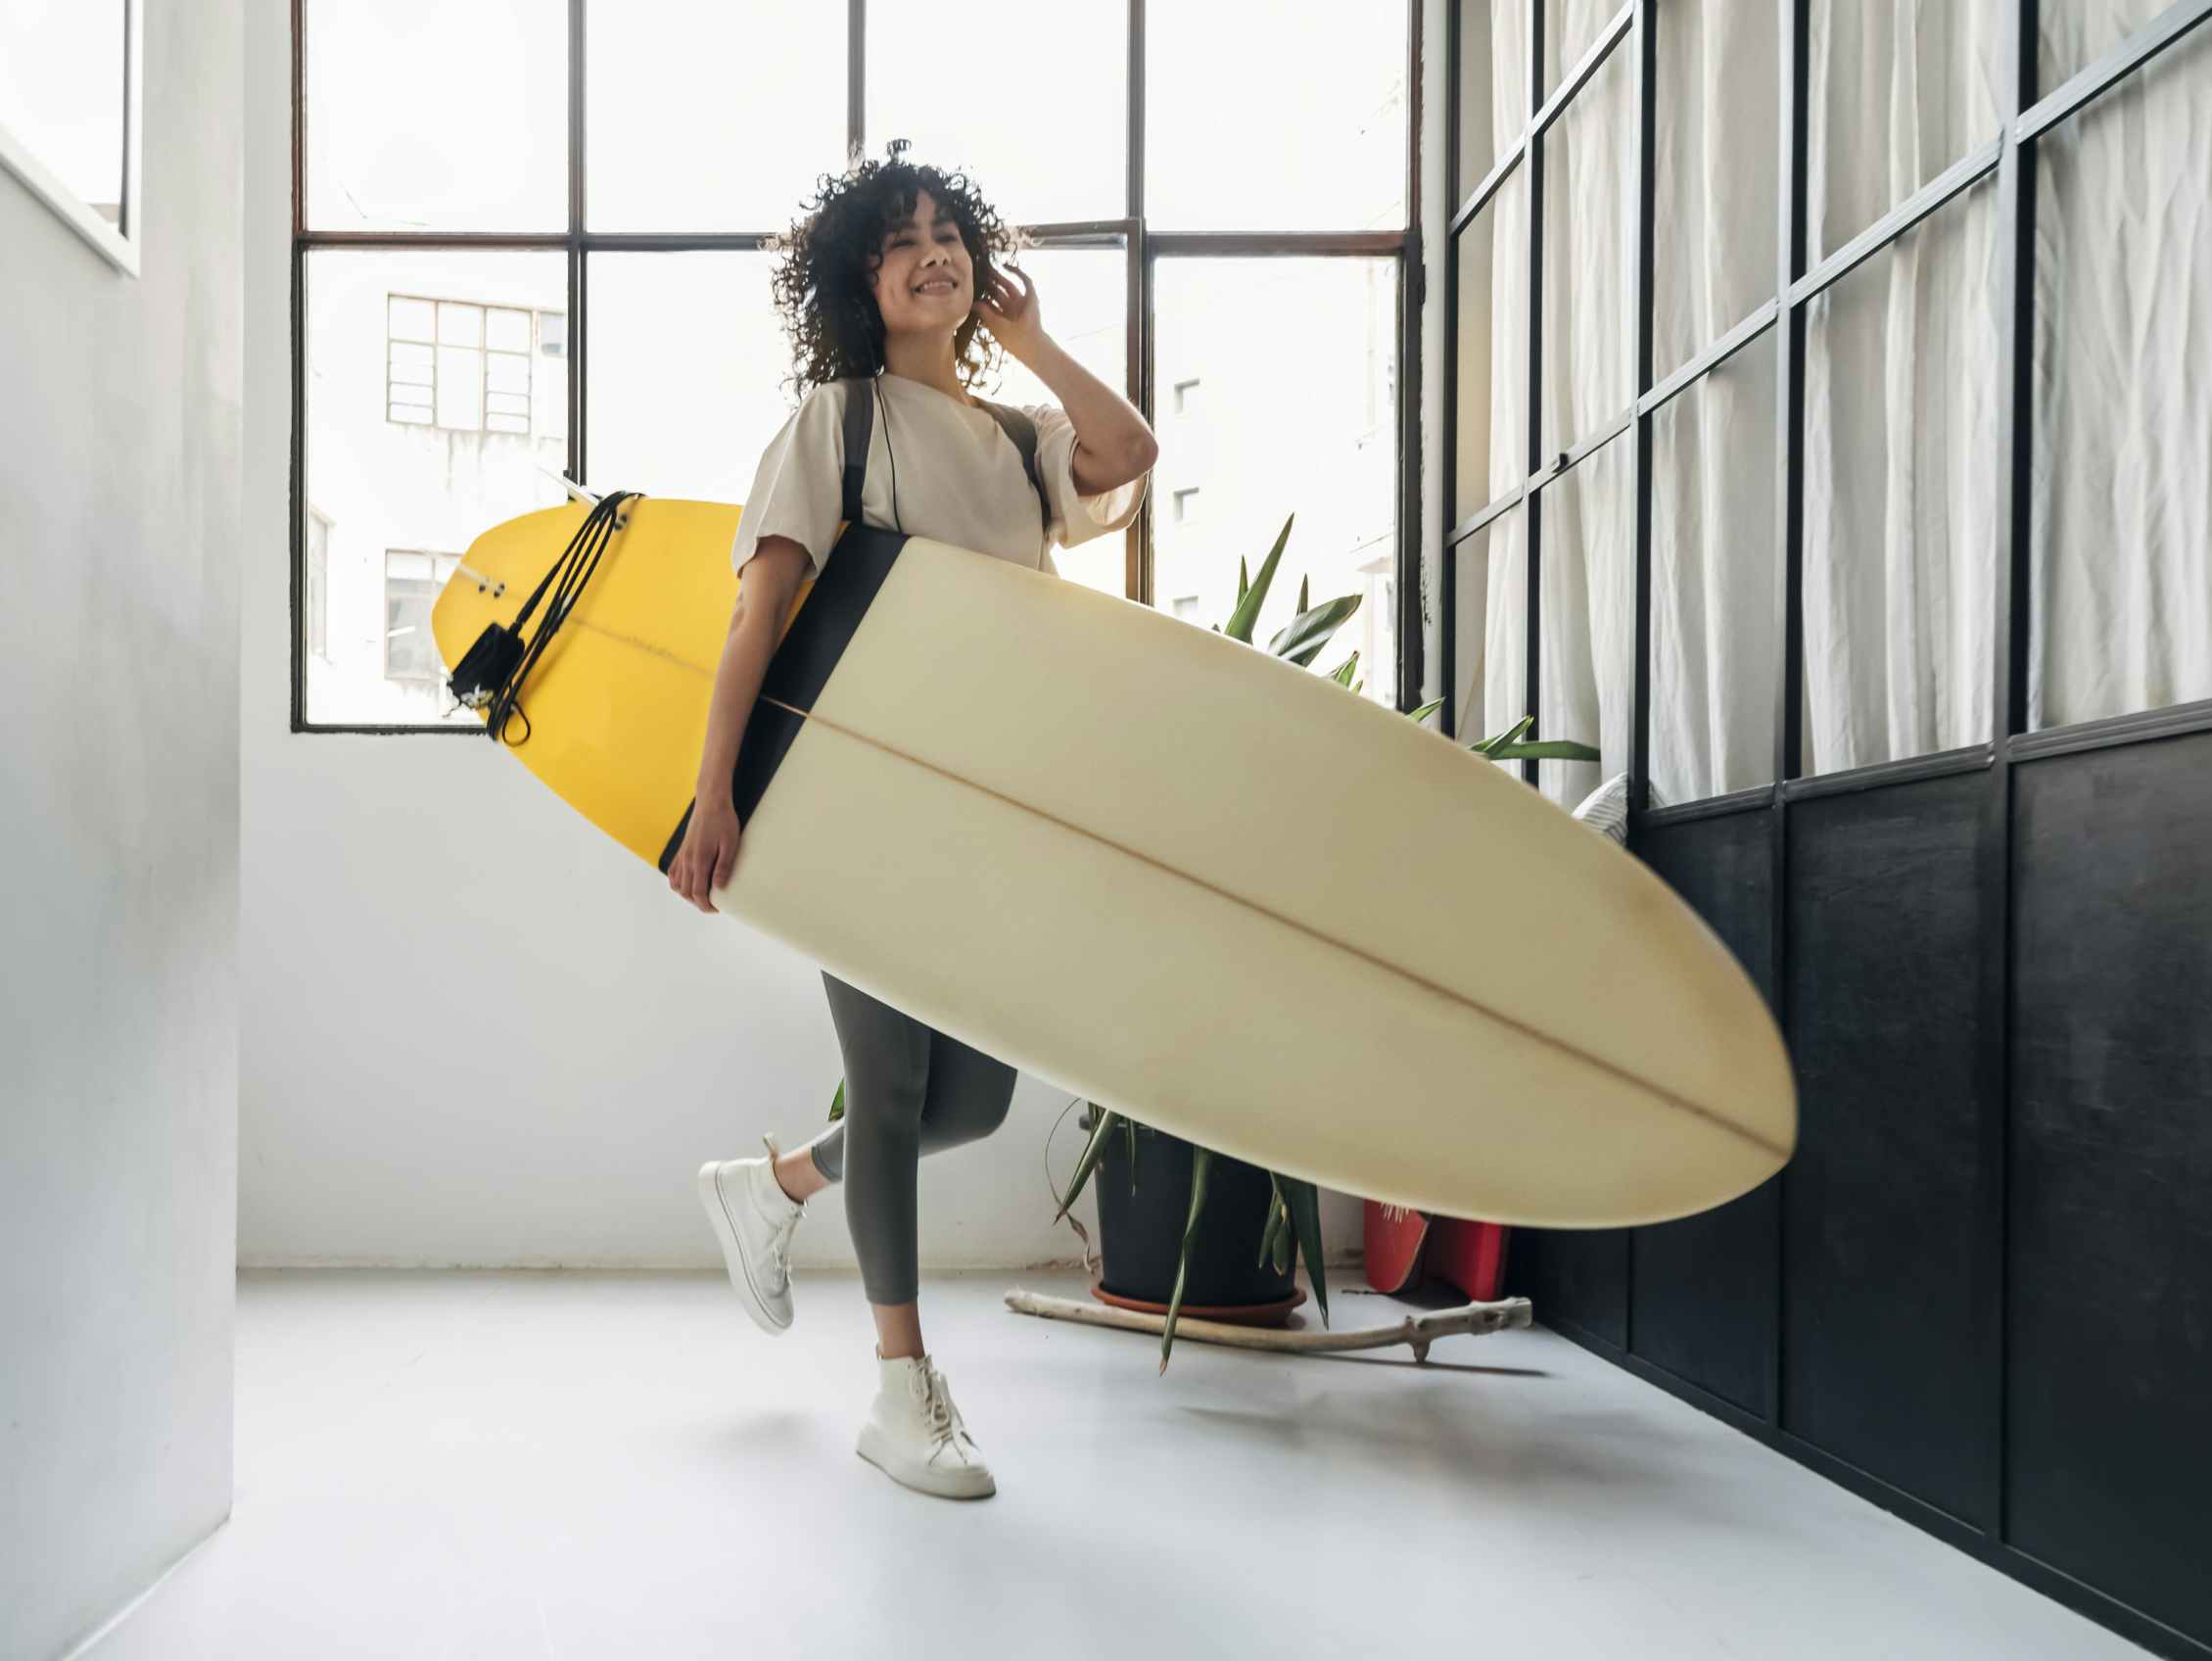 A young person carrying a surfboard inside of a building